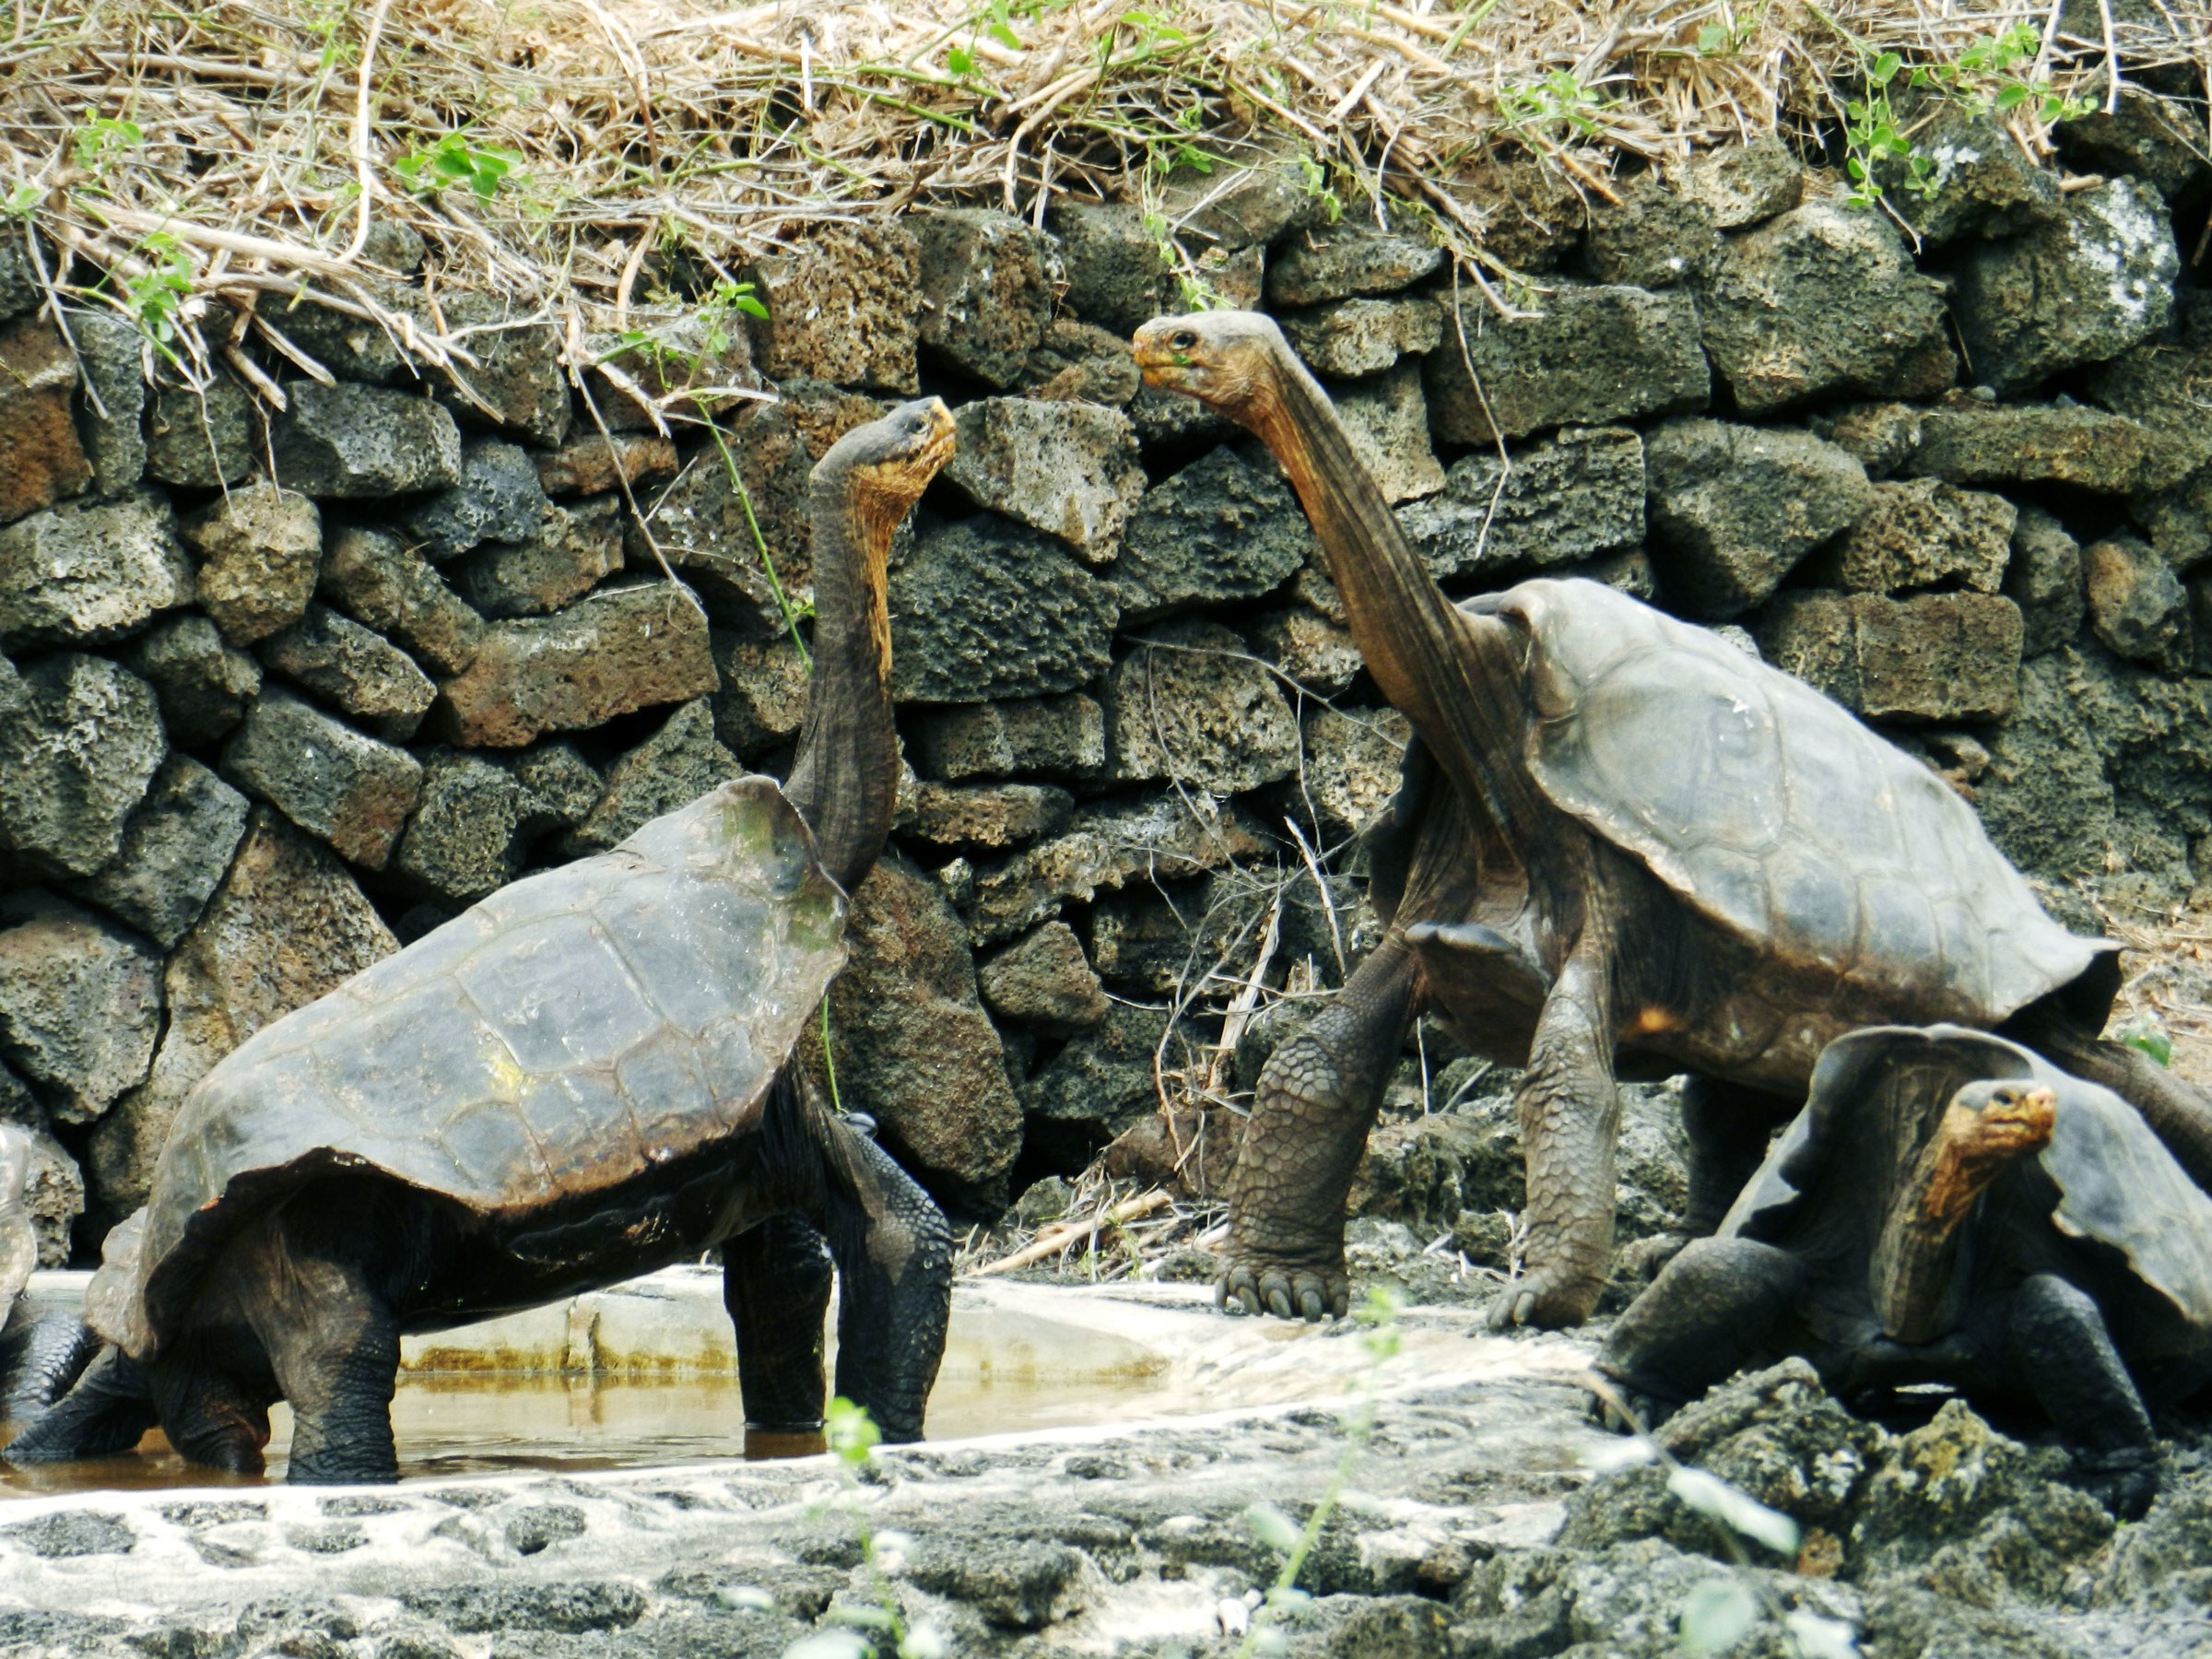 Resurrecting a Long-Lost Galapagos Giant Tortoise | WIRED